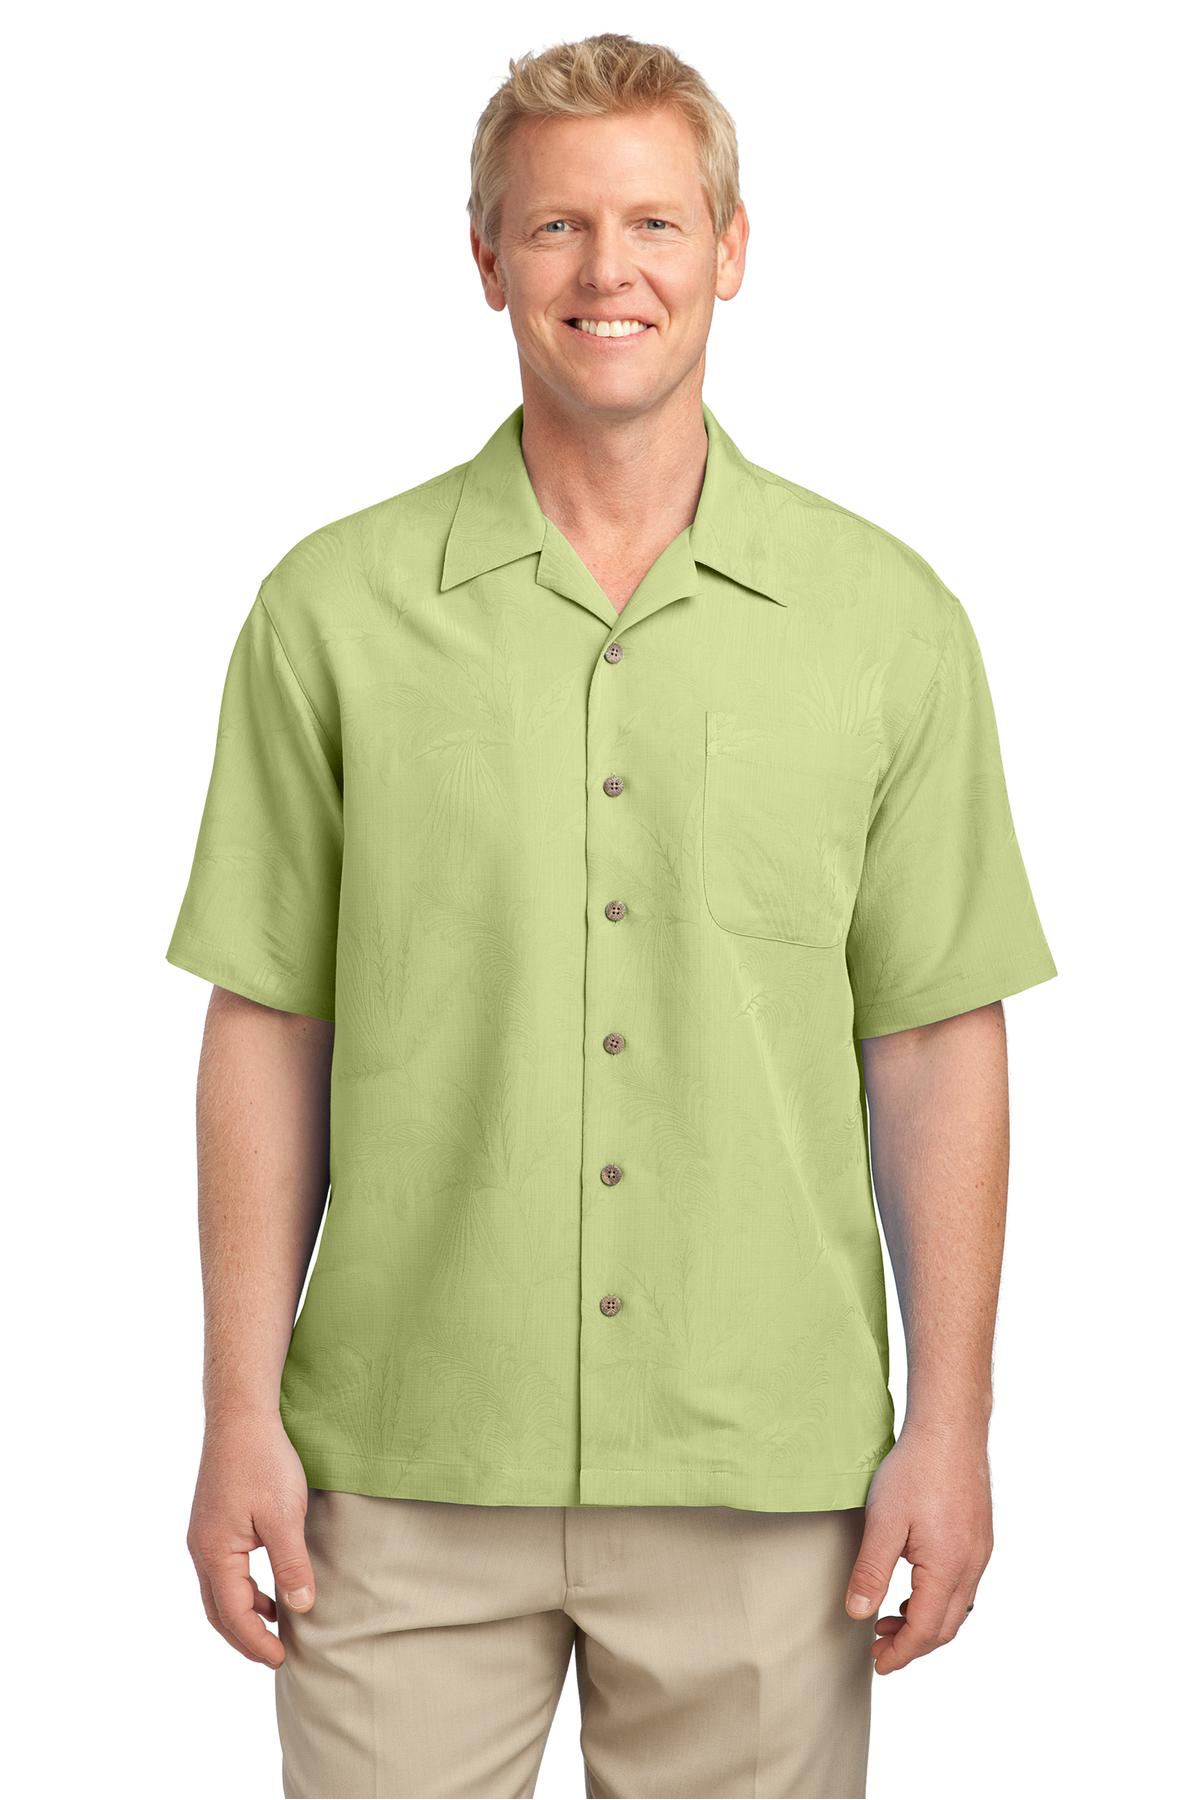 Port Authority Patterned Easy Care Camp Shirt | Product | SanMar